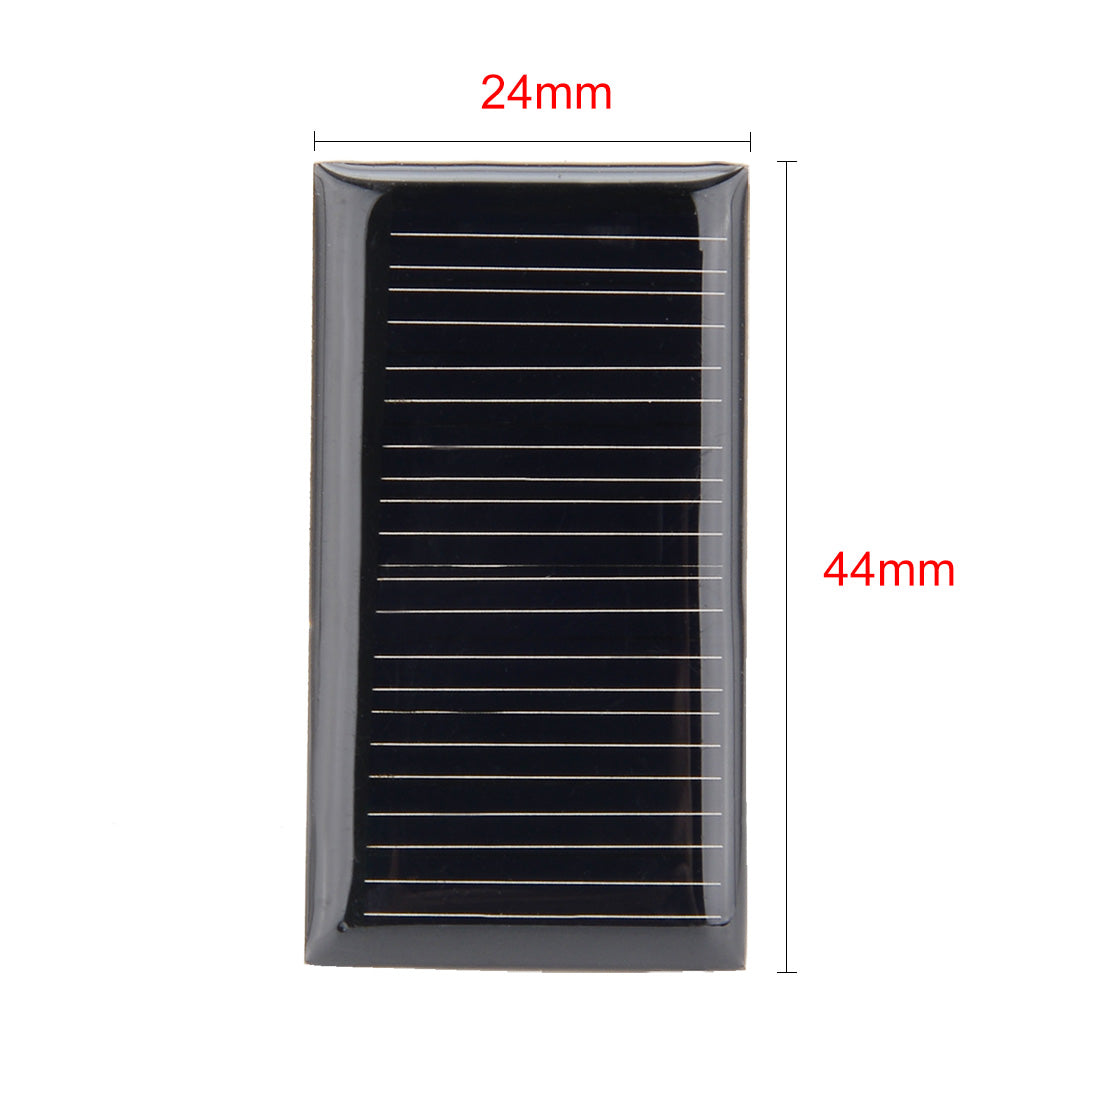 uxcell Uxcell 5Pcs 5V 25mA Poly Mini Solar Cell Panel Module DIY for Phone Light Toys Charger 44mm x 24mm